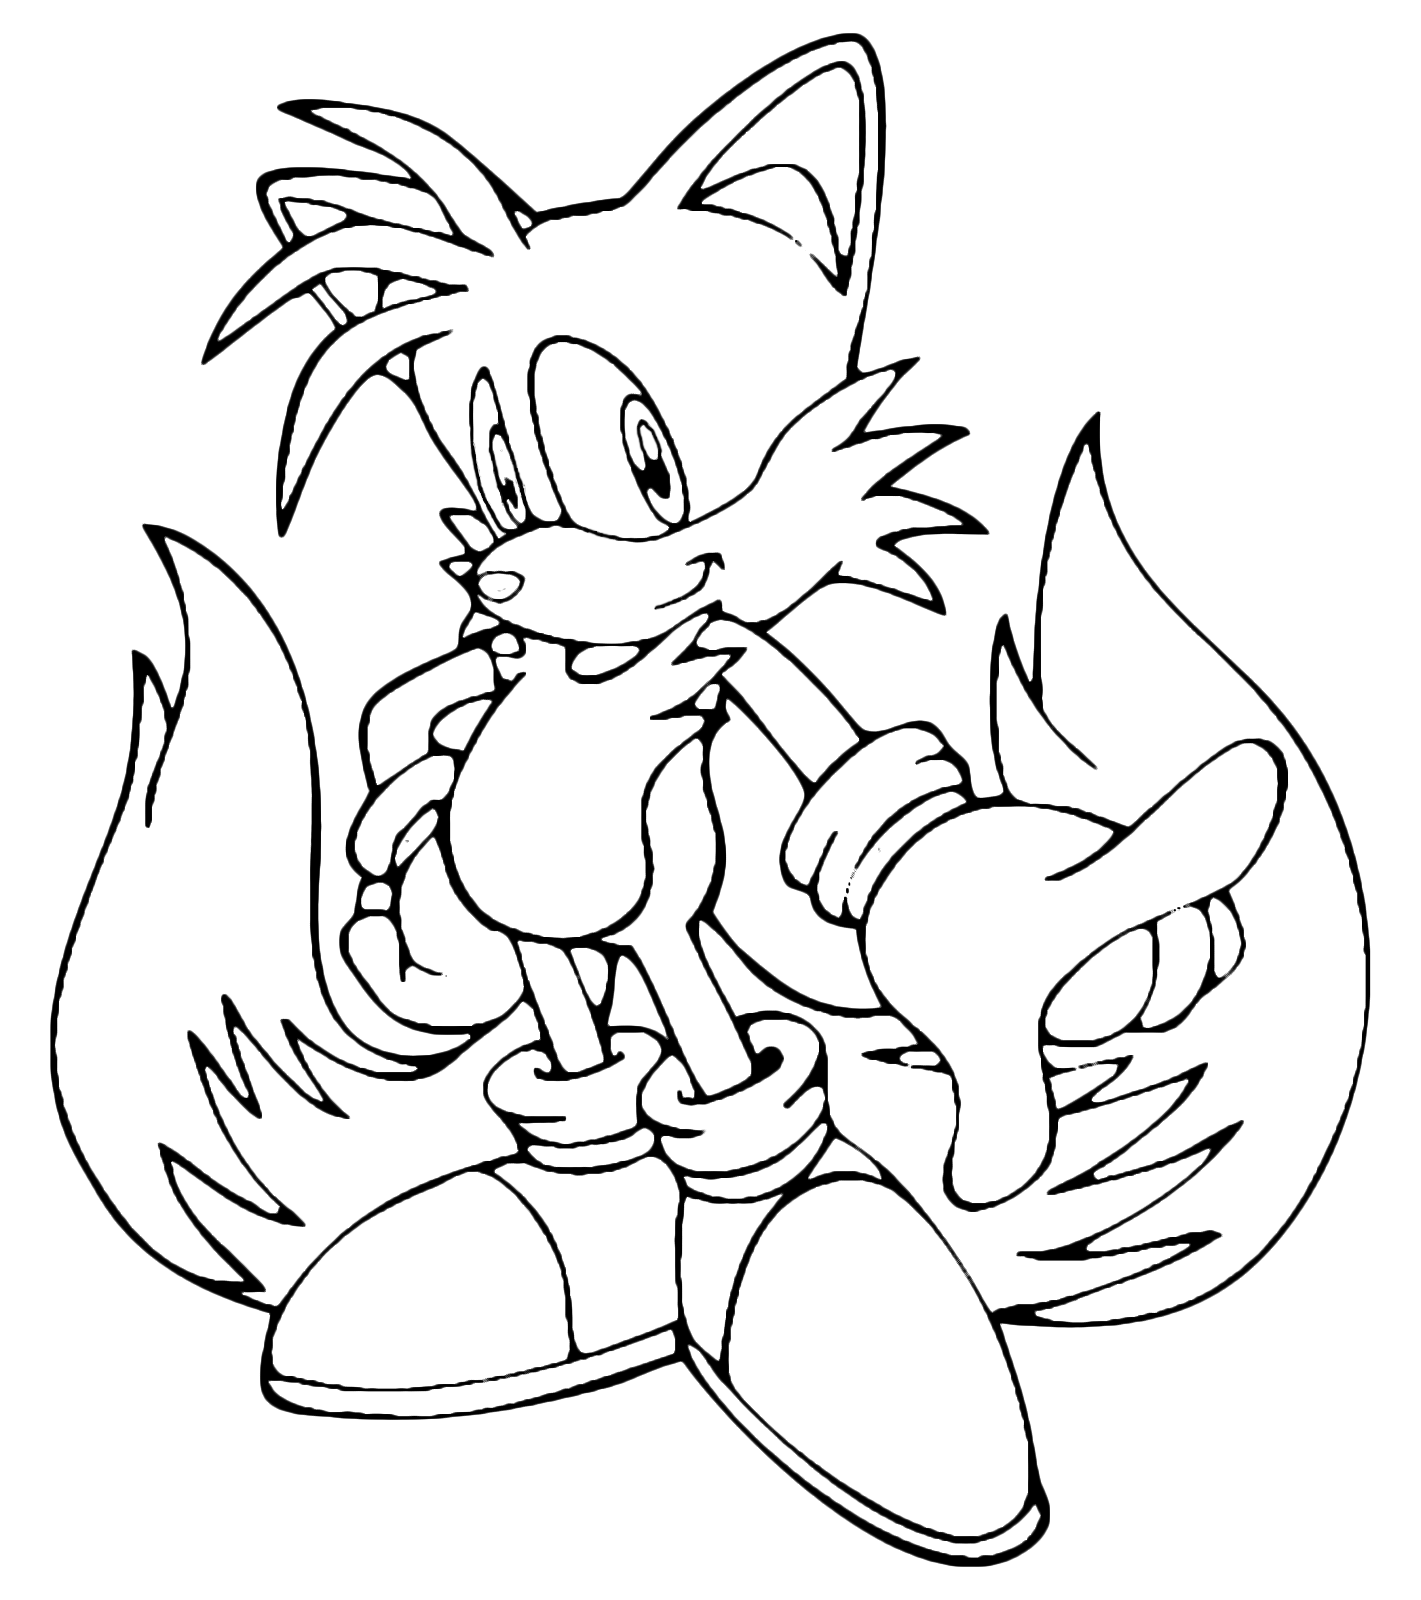 27 Knuckles Sonic Coloring Pages Fahrulroup